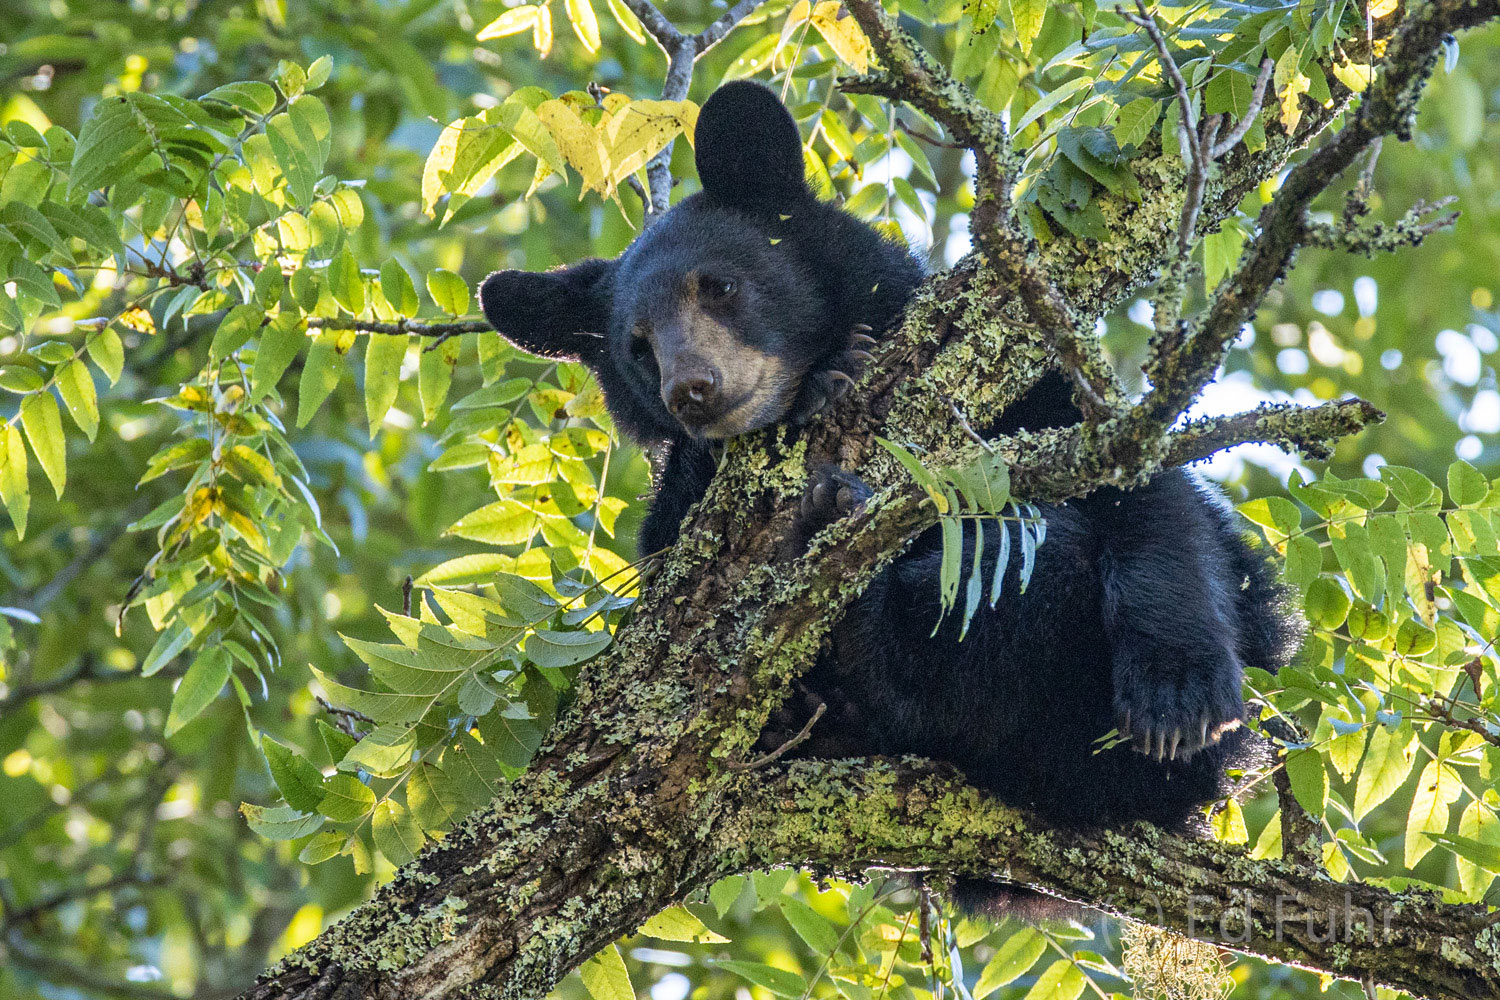 A young cub checks out his surroundings from the safety of a high tree canopy.